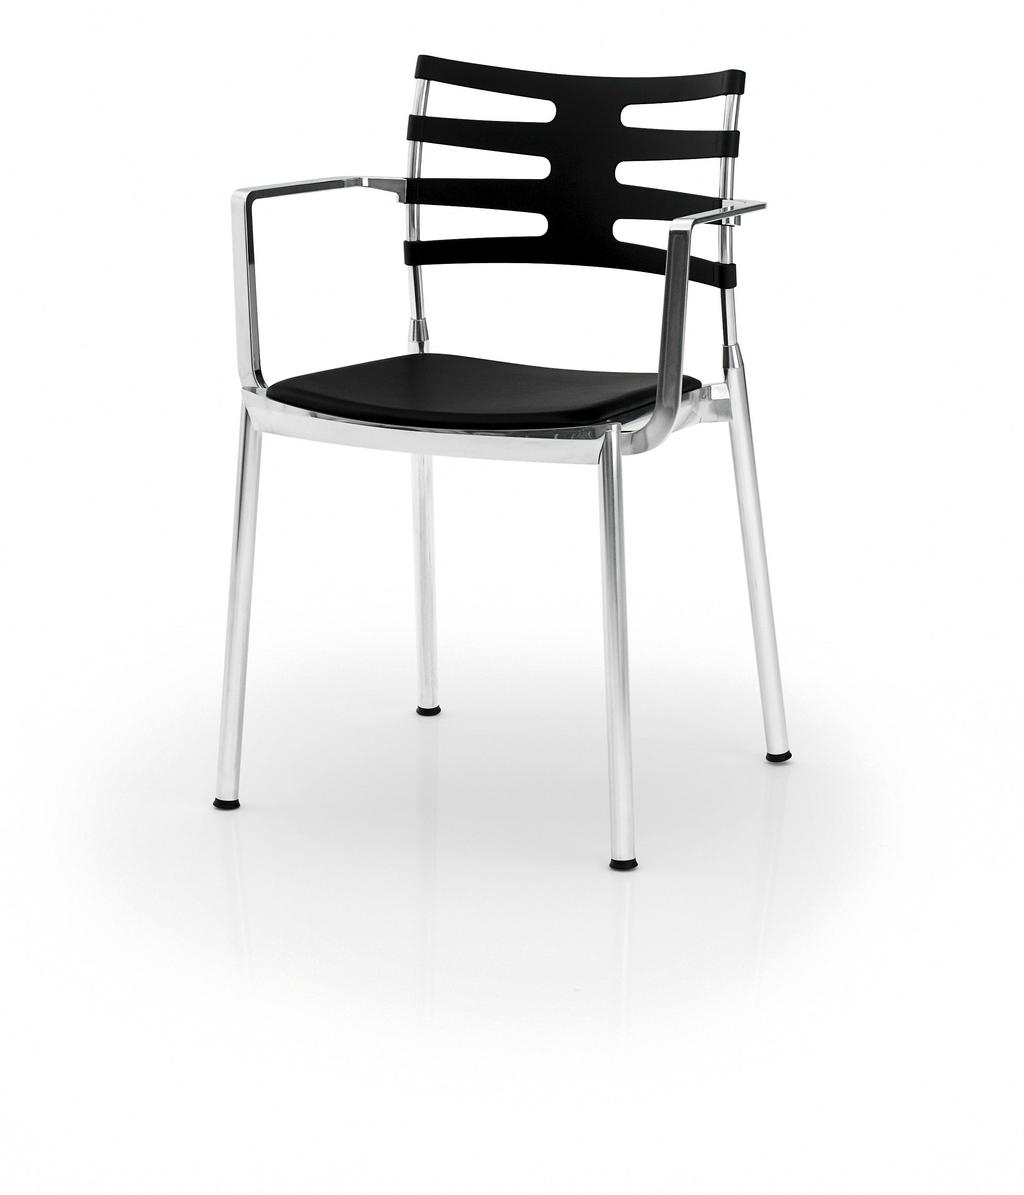 ICE CHAIR The Ice chair, designed by Kasper Salto, marks a milestone in the history of Fritz Hansen: Ice is the first chair from the hand of Fritz Hansen that is equally suited for both indoor and